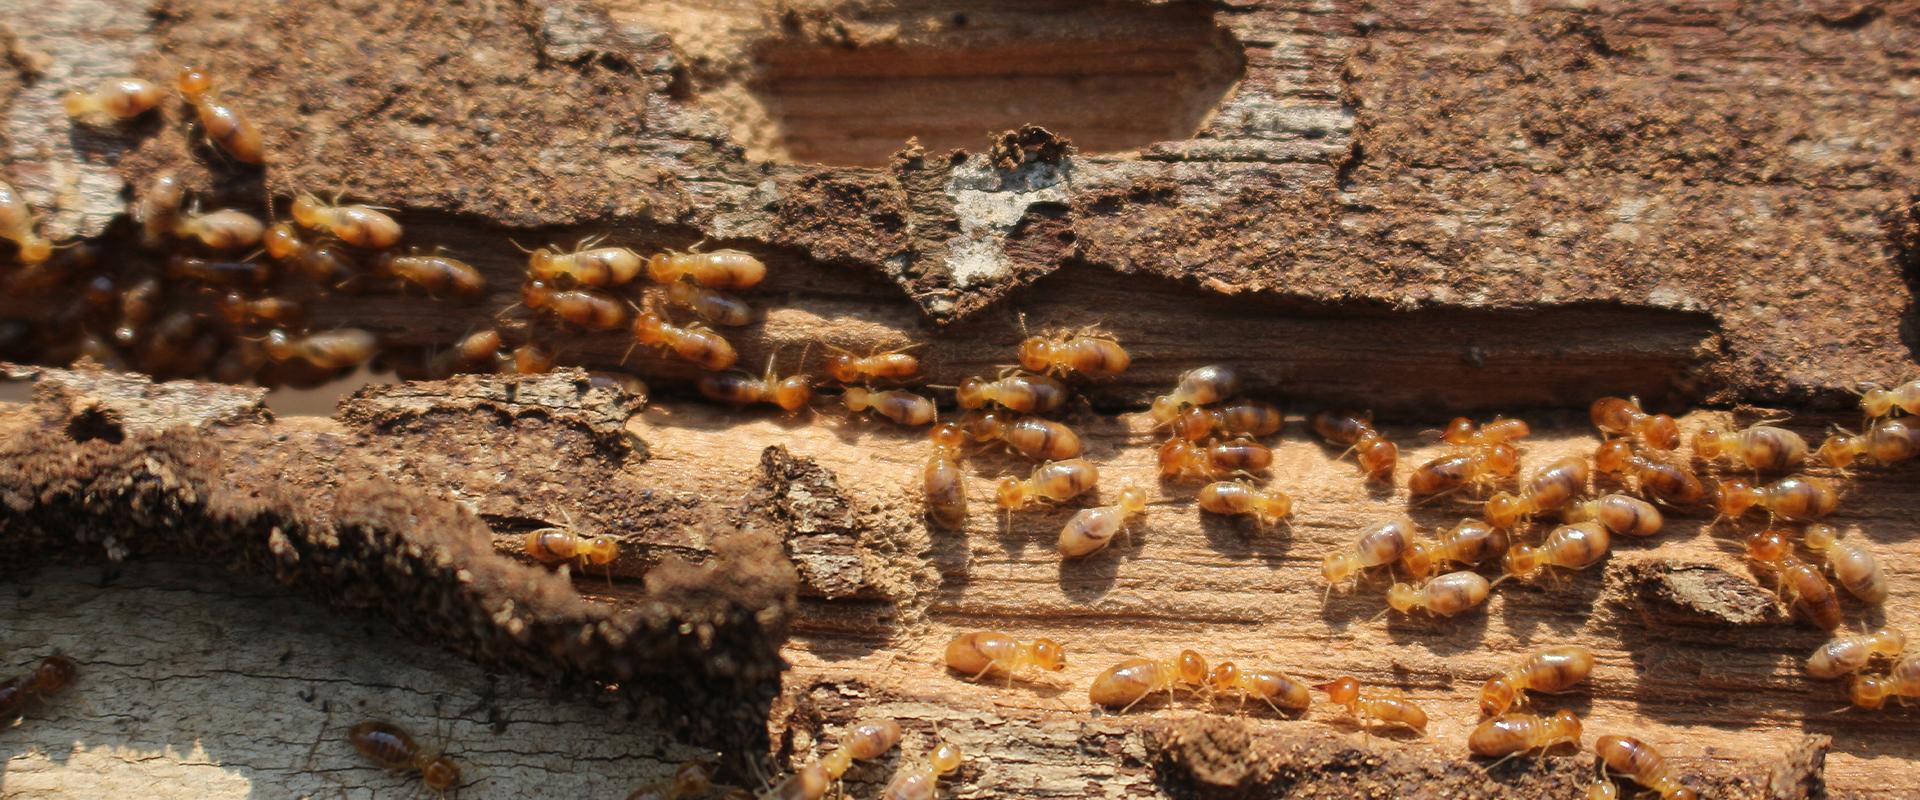 termites in the wood